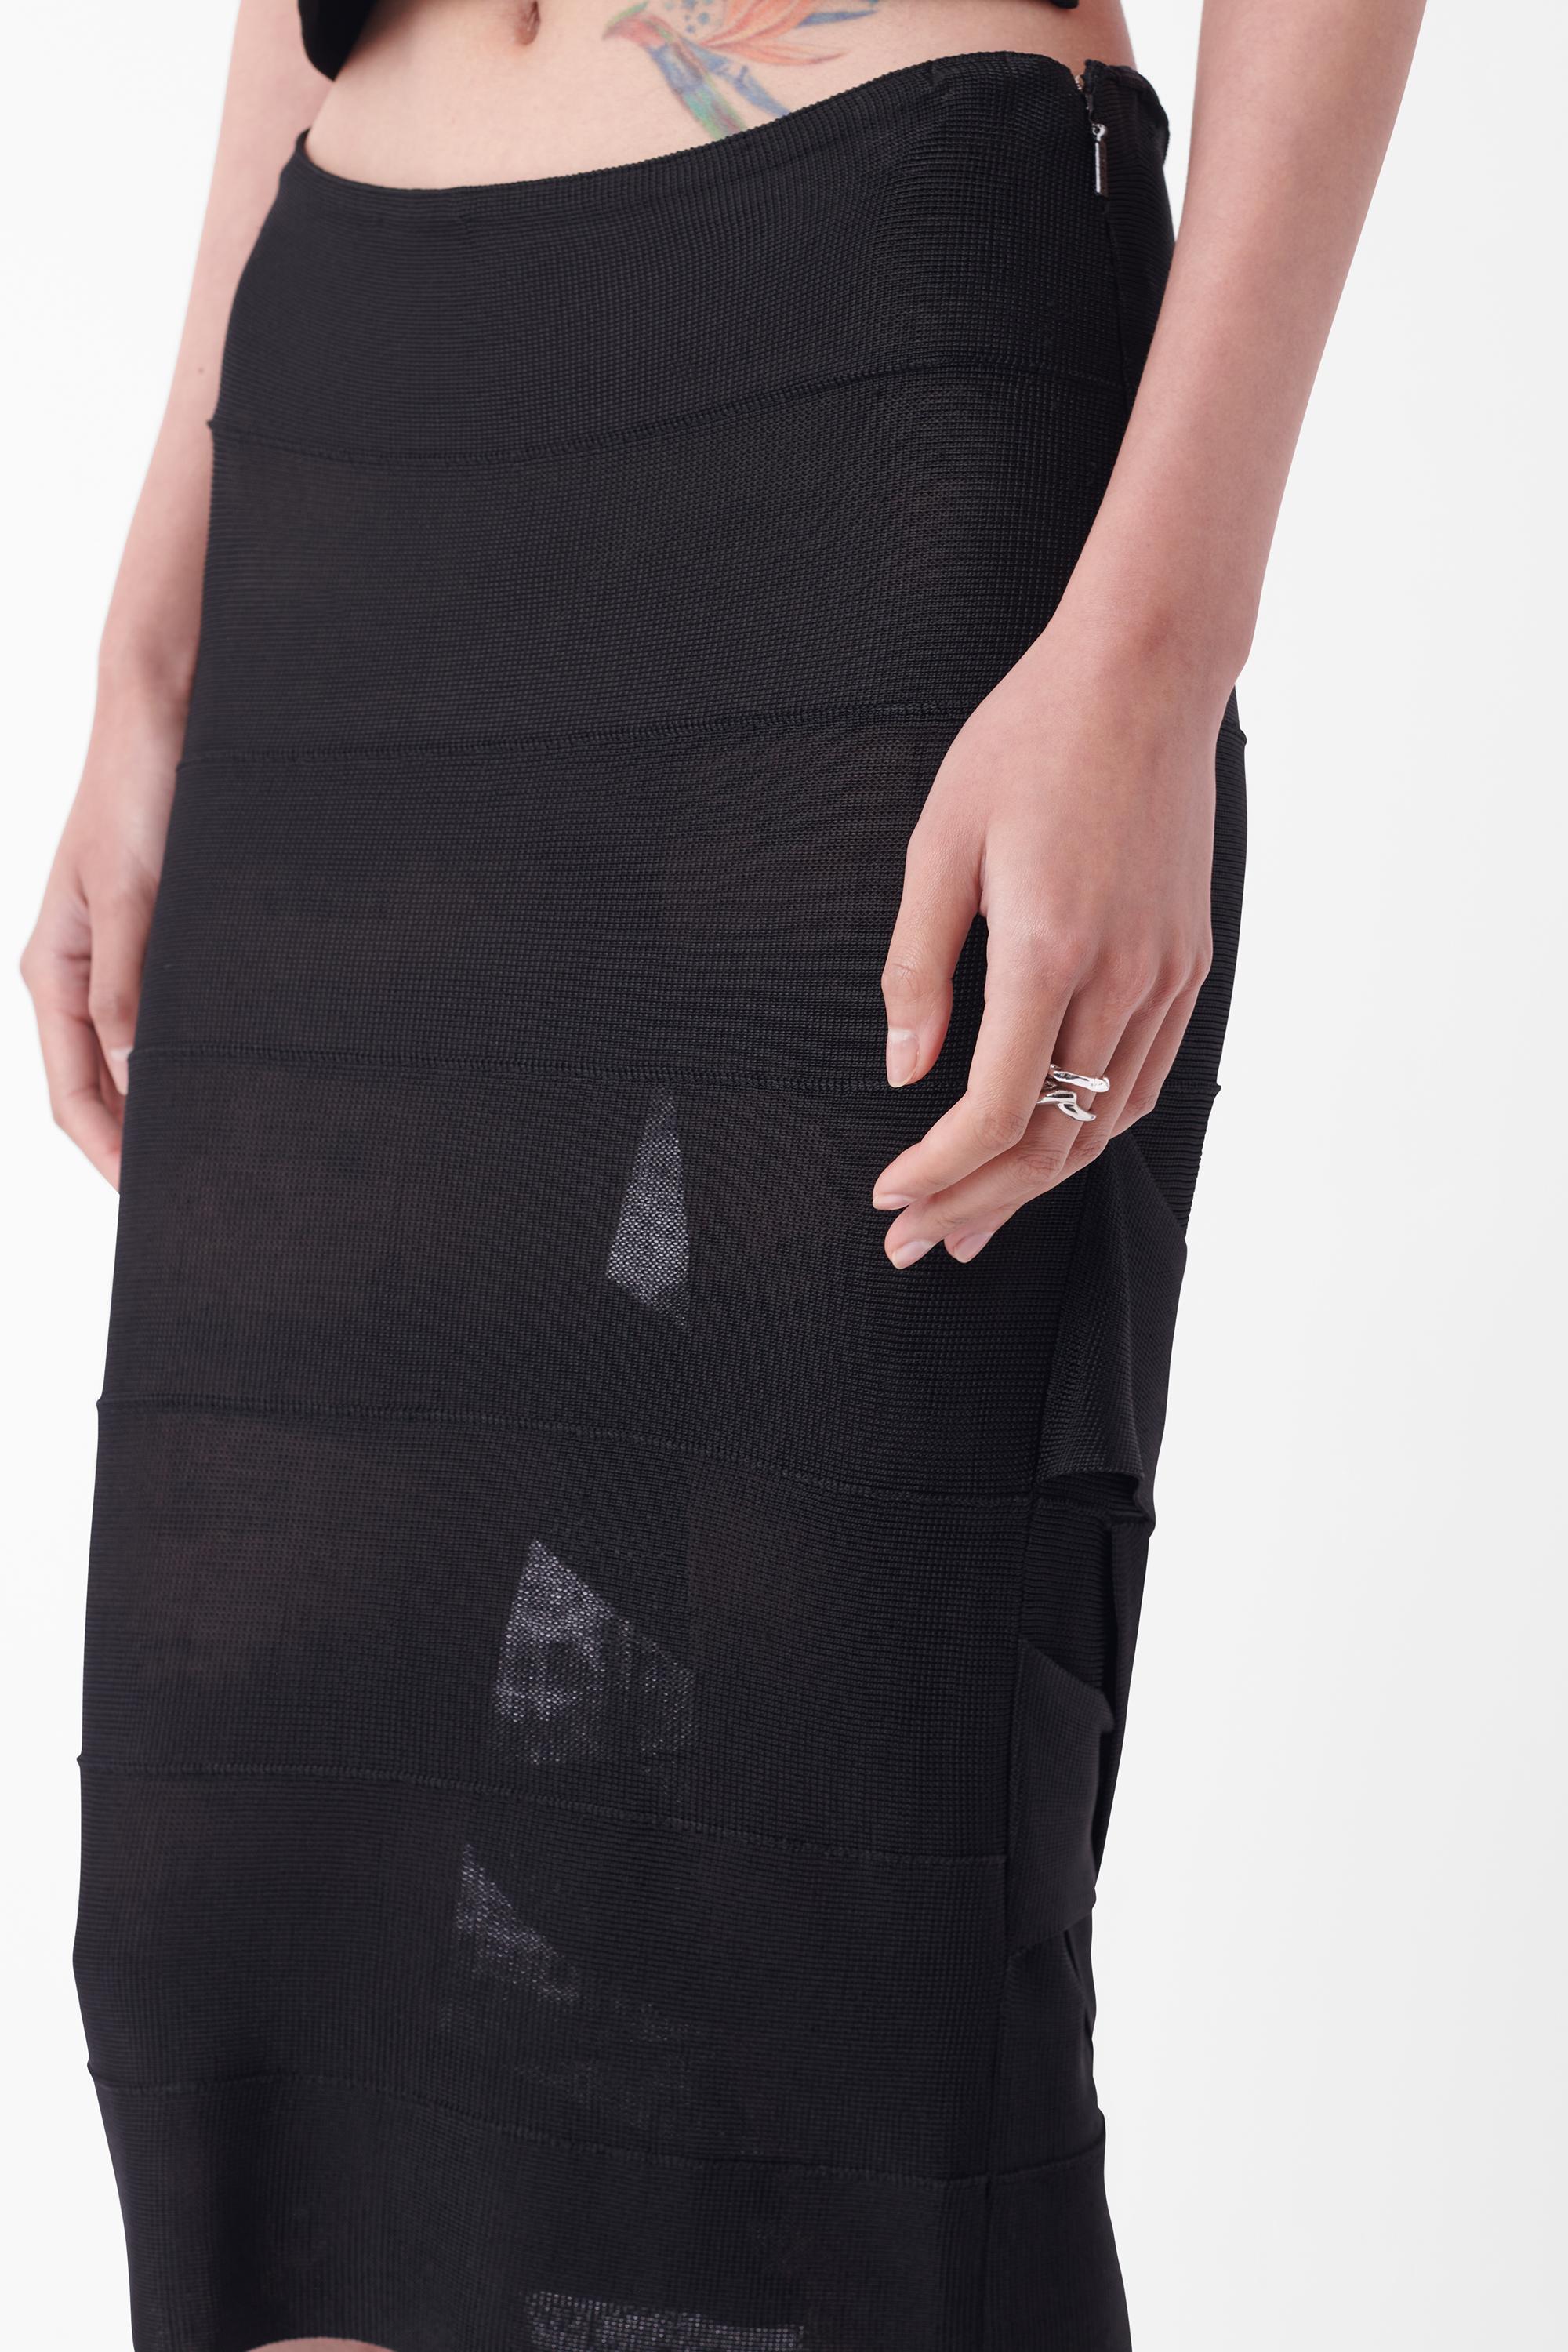 Vintage F/W 2002 Bodycon Black Midi Skirt In Excellent Condition For Sale In London, GB